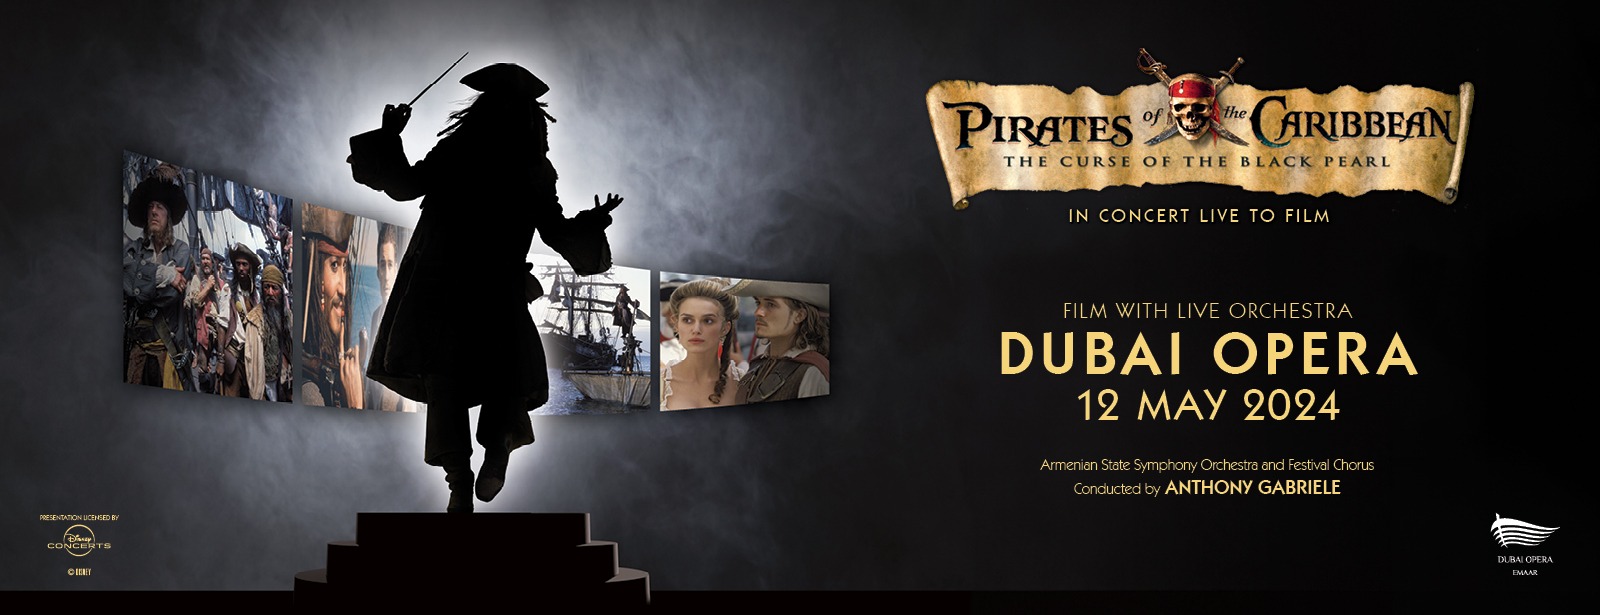 Pirates of the Caribbean: The Curse of the Black Pearl Live in Concert at Dubai Opera - Coming Soon in UAE